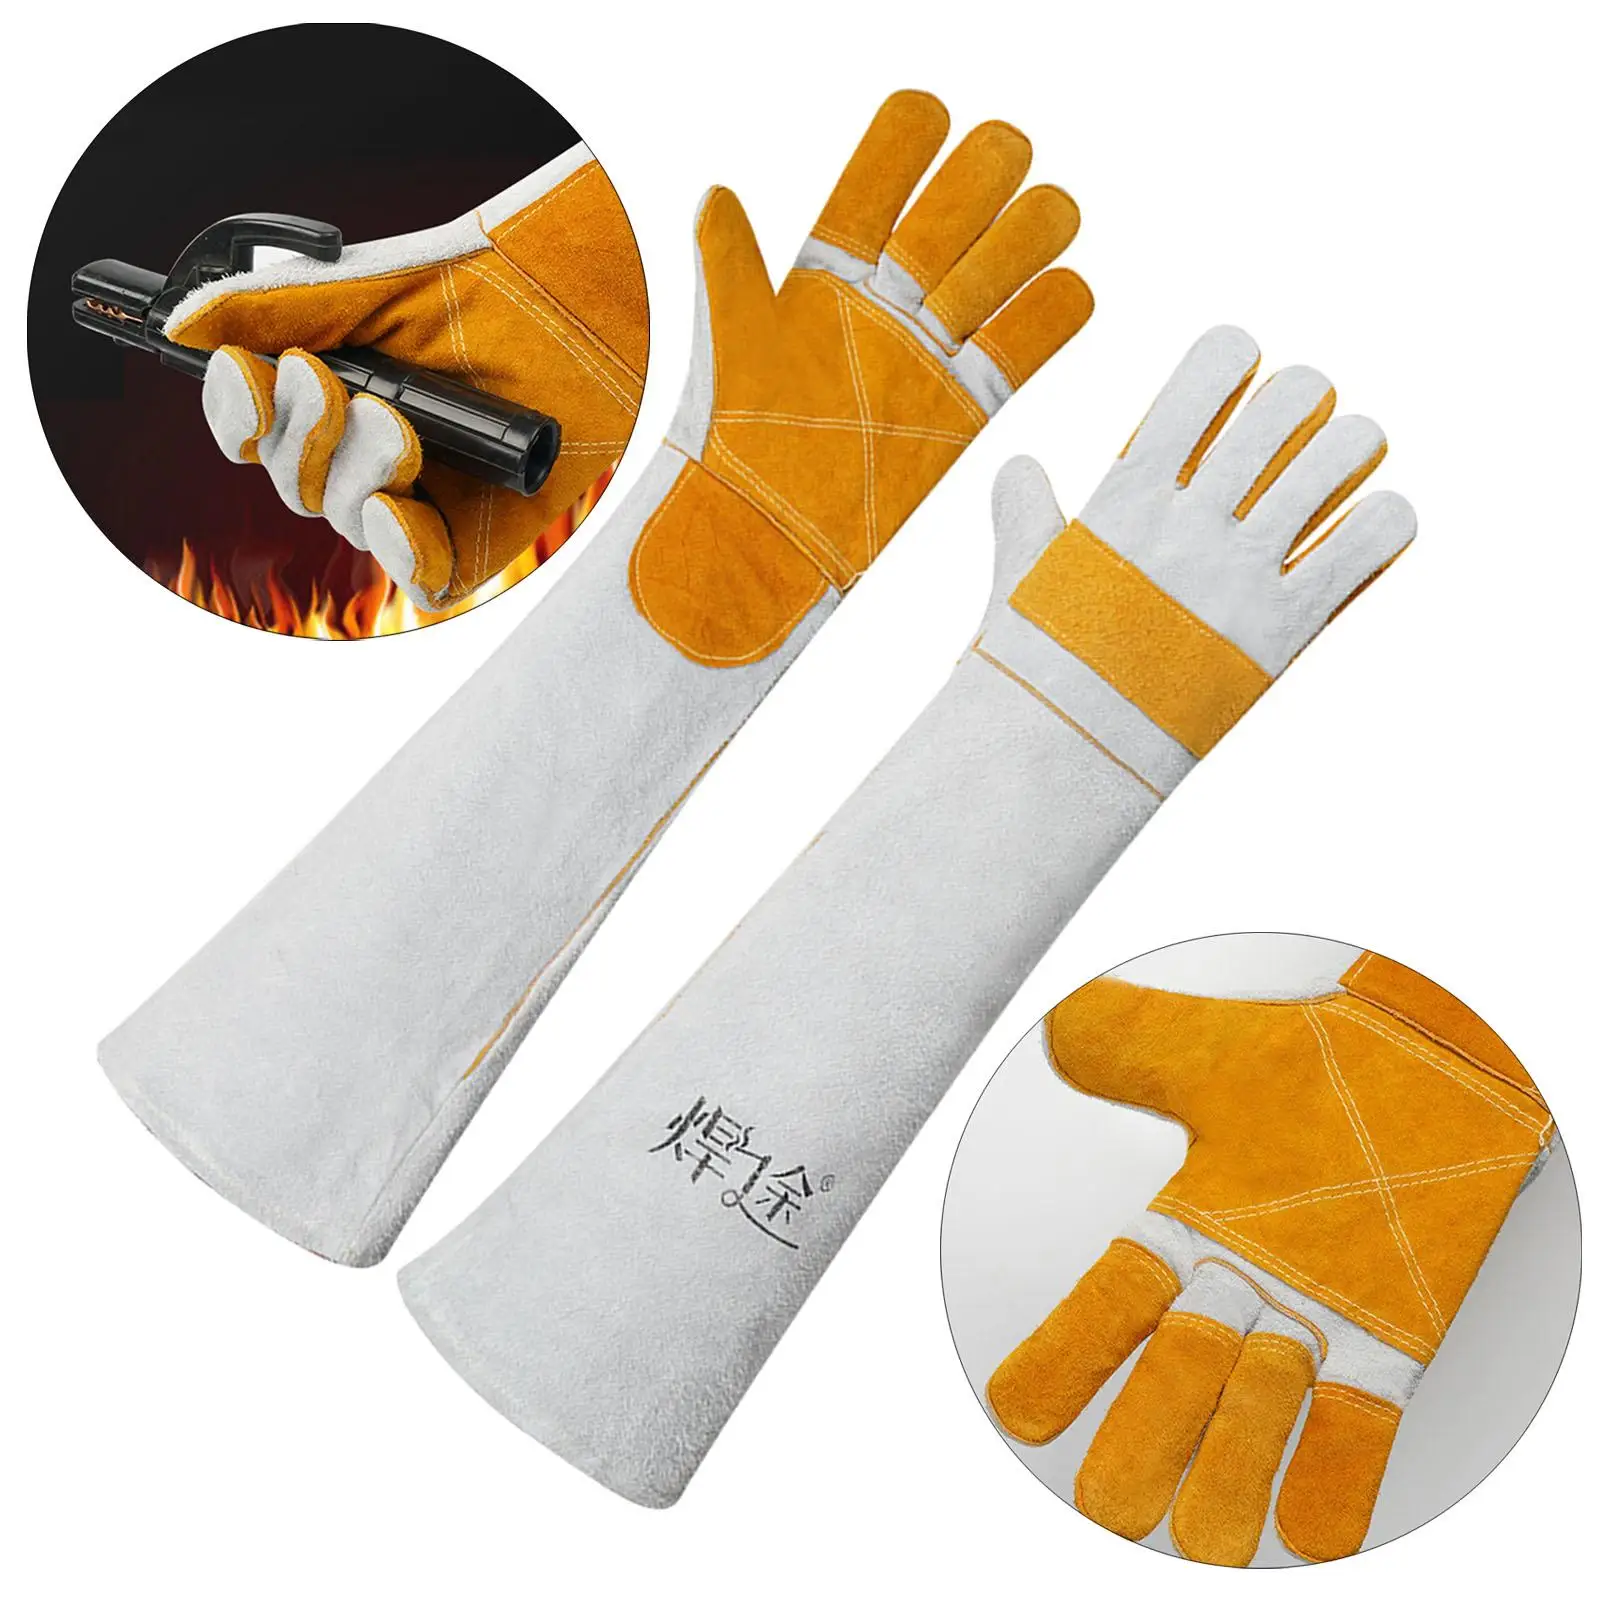 Pair of Electric Welding Gloves Wear Resistant Welding Accessories Protection Gloves Fireproof for Women Men